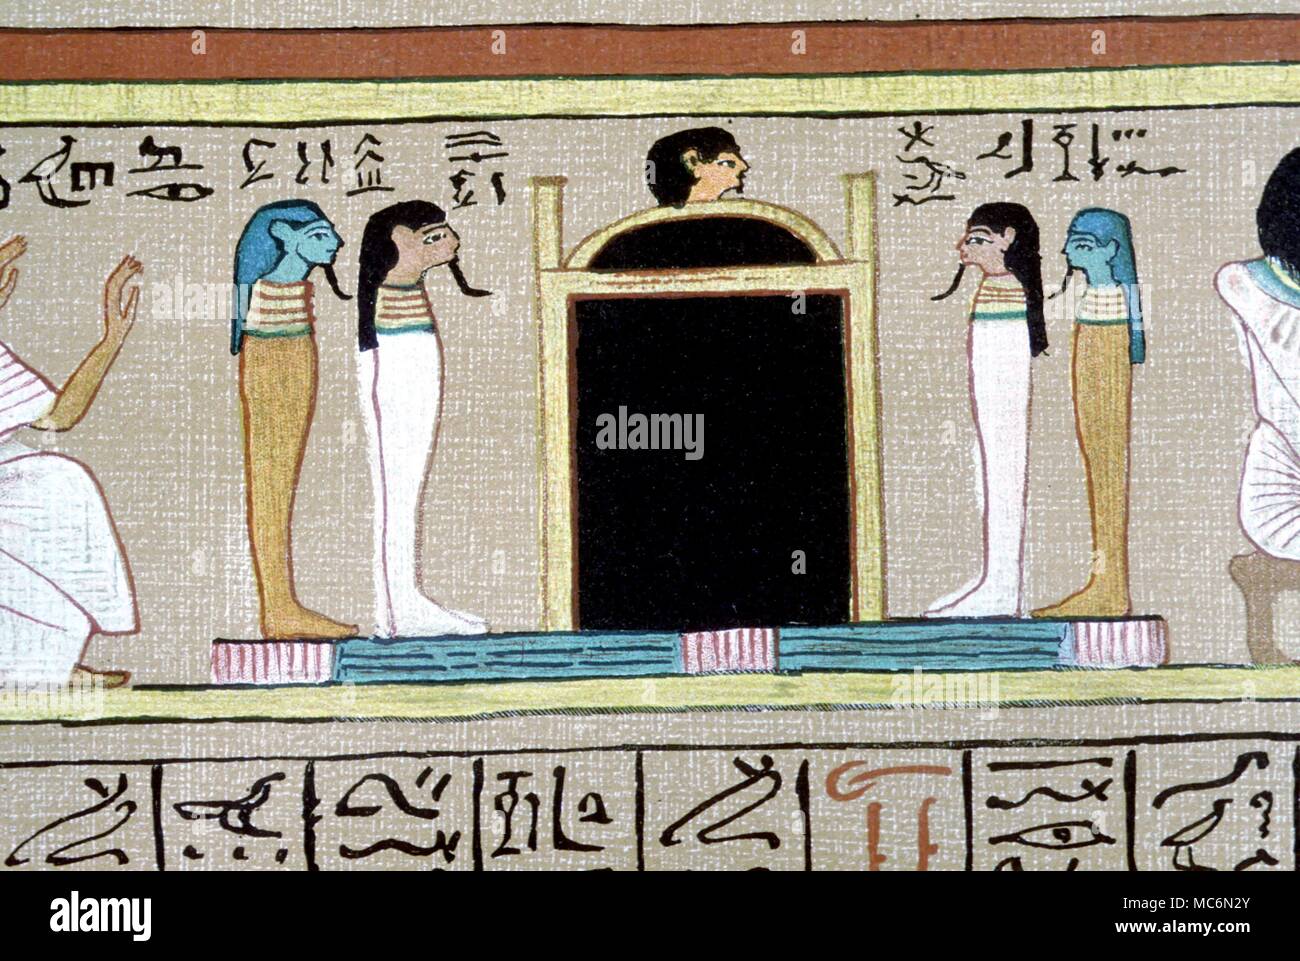 Egyptian Myth - Osiris in the Tomb The god Osiris in the tomb, guarded by the four sons of Horus. This is typical resurrectional image from the initiation mysteries. From the Hunefer papyrus of the 'Egyptian Book of The Dead' Stock Photo